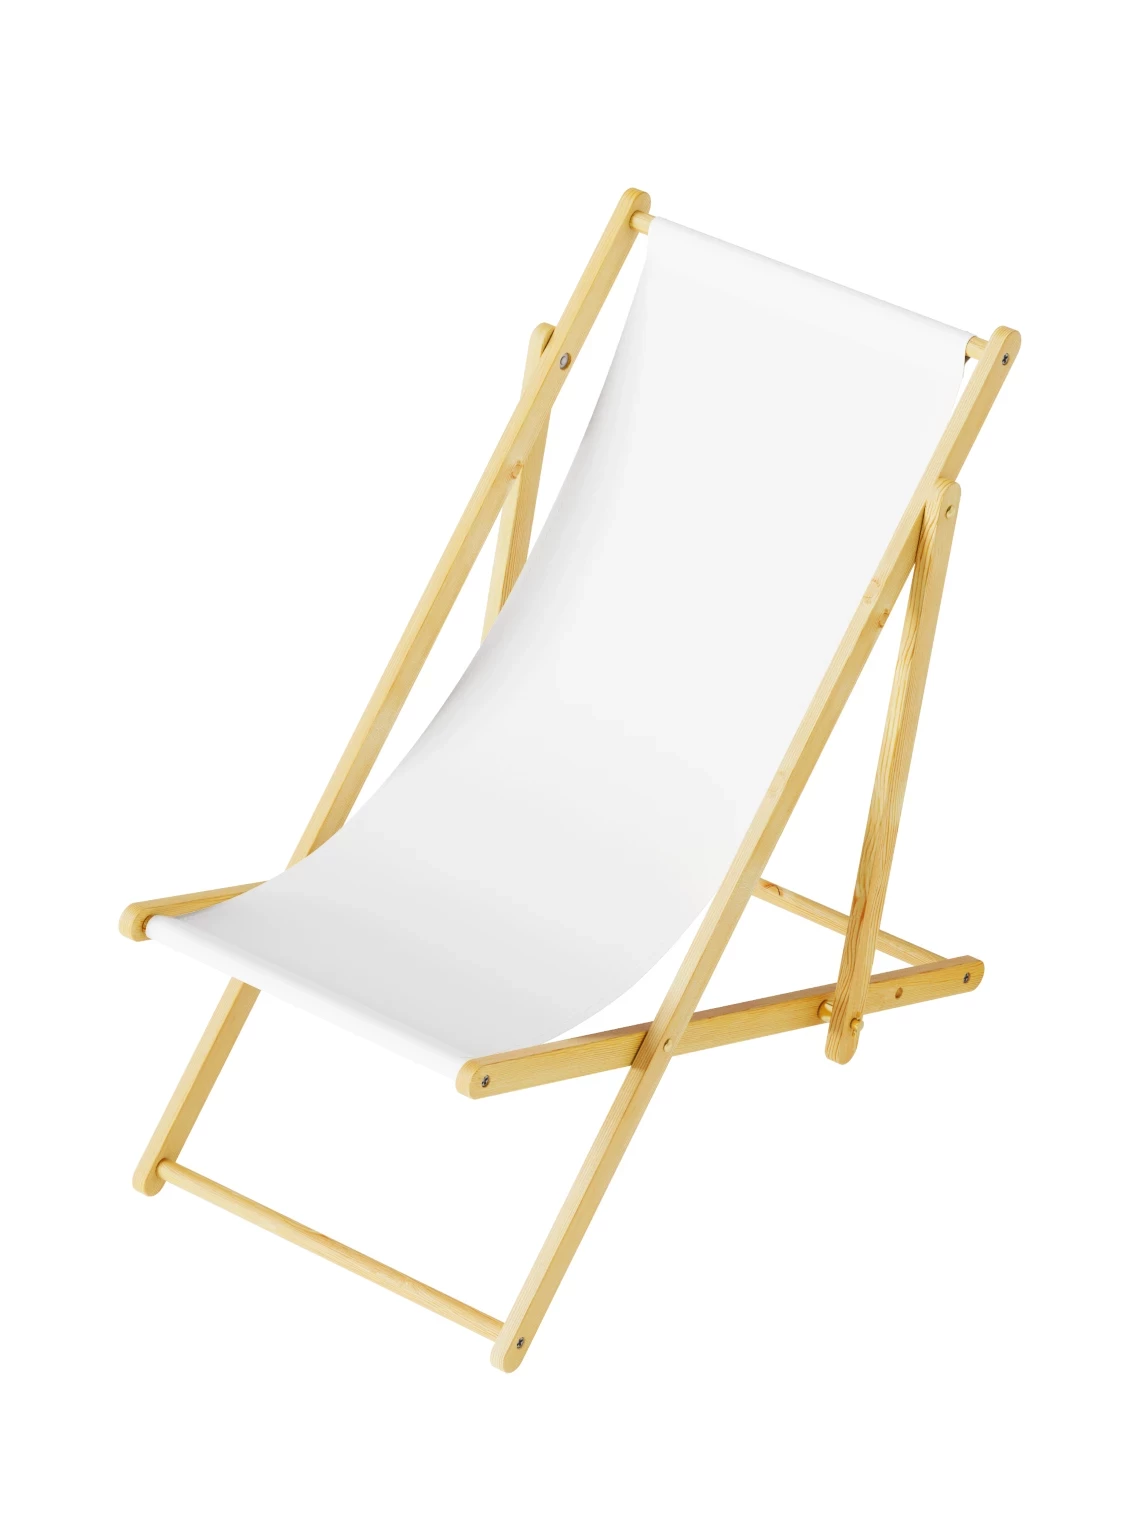 Promotional Deck Chair with Print